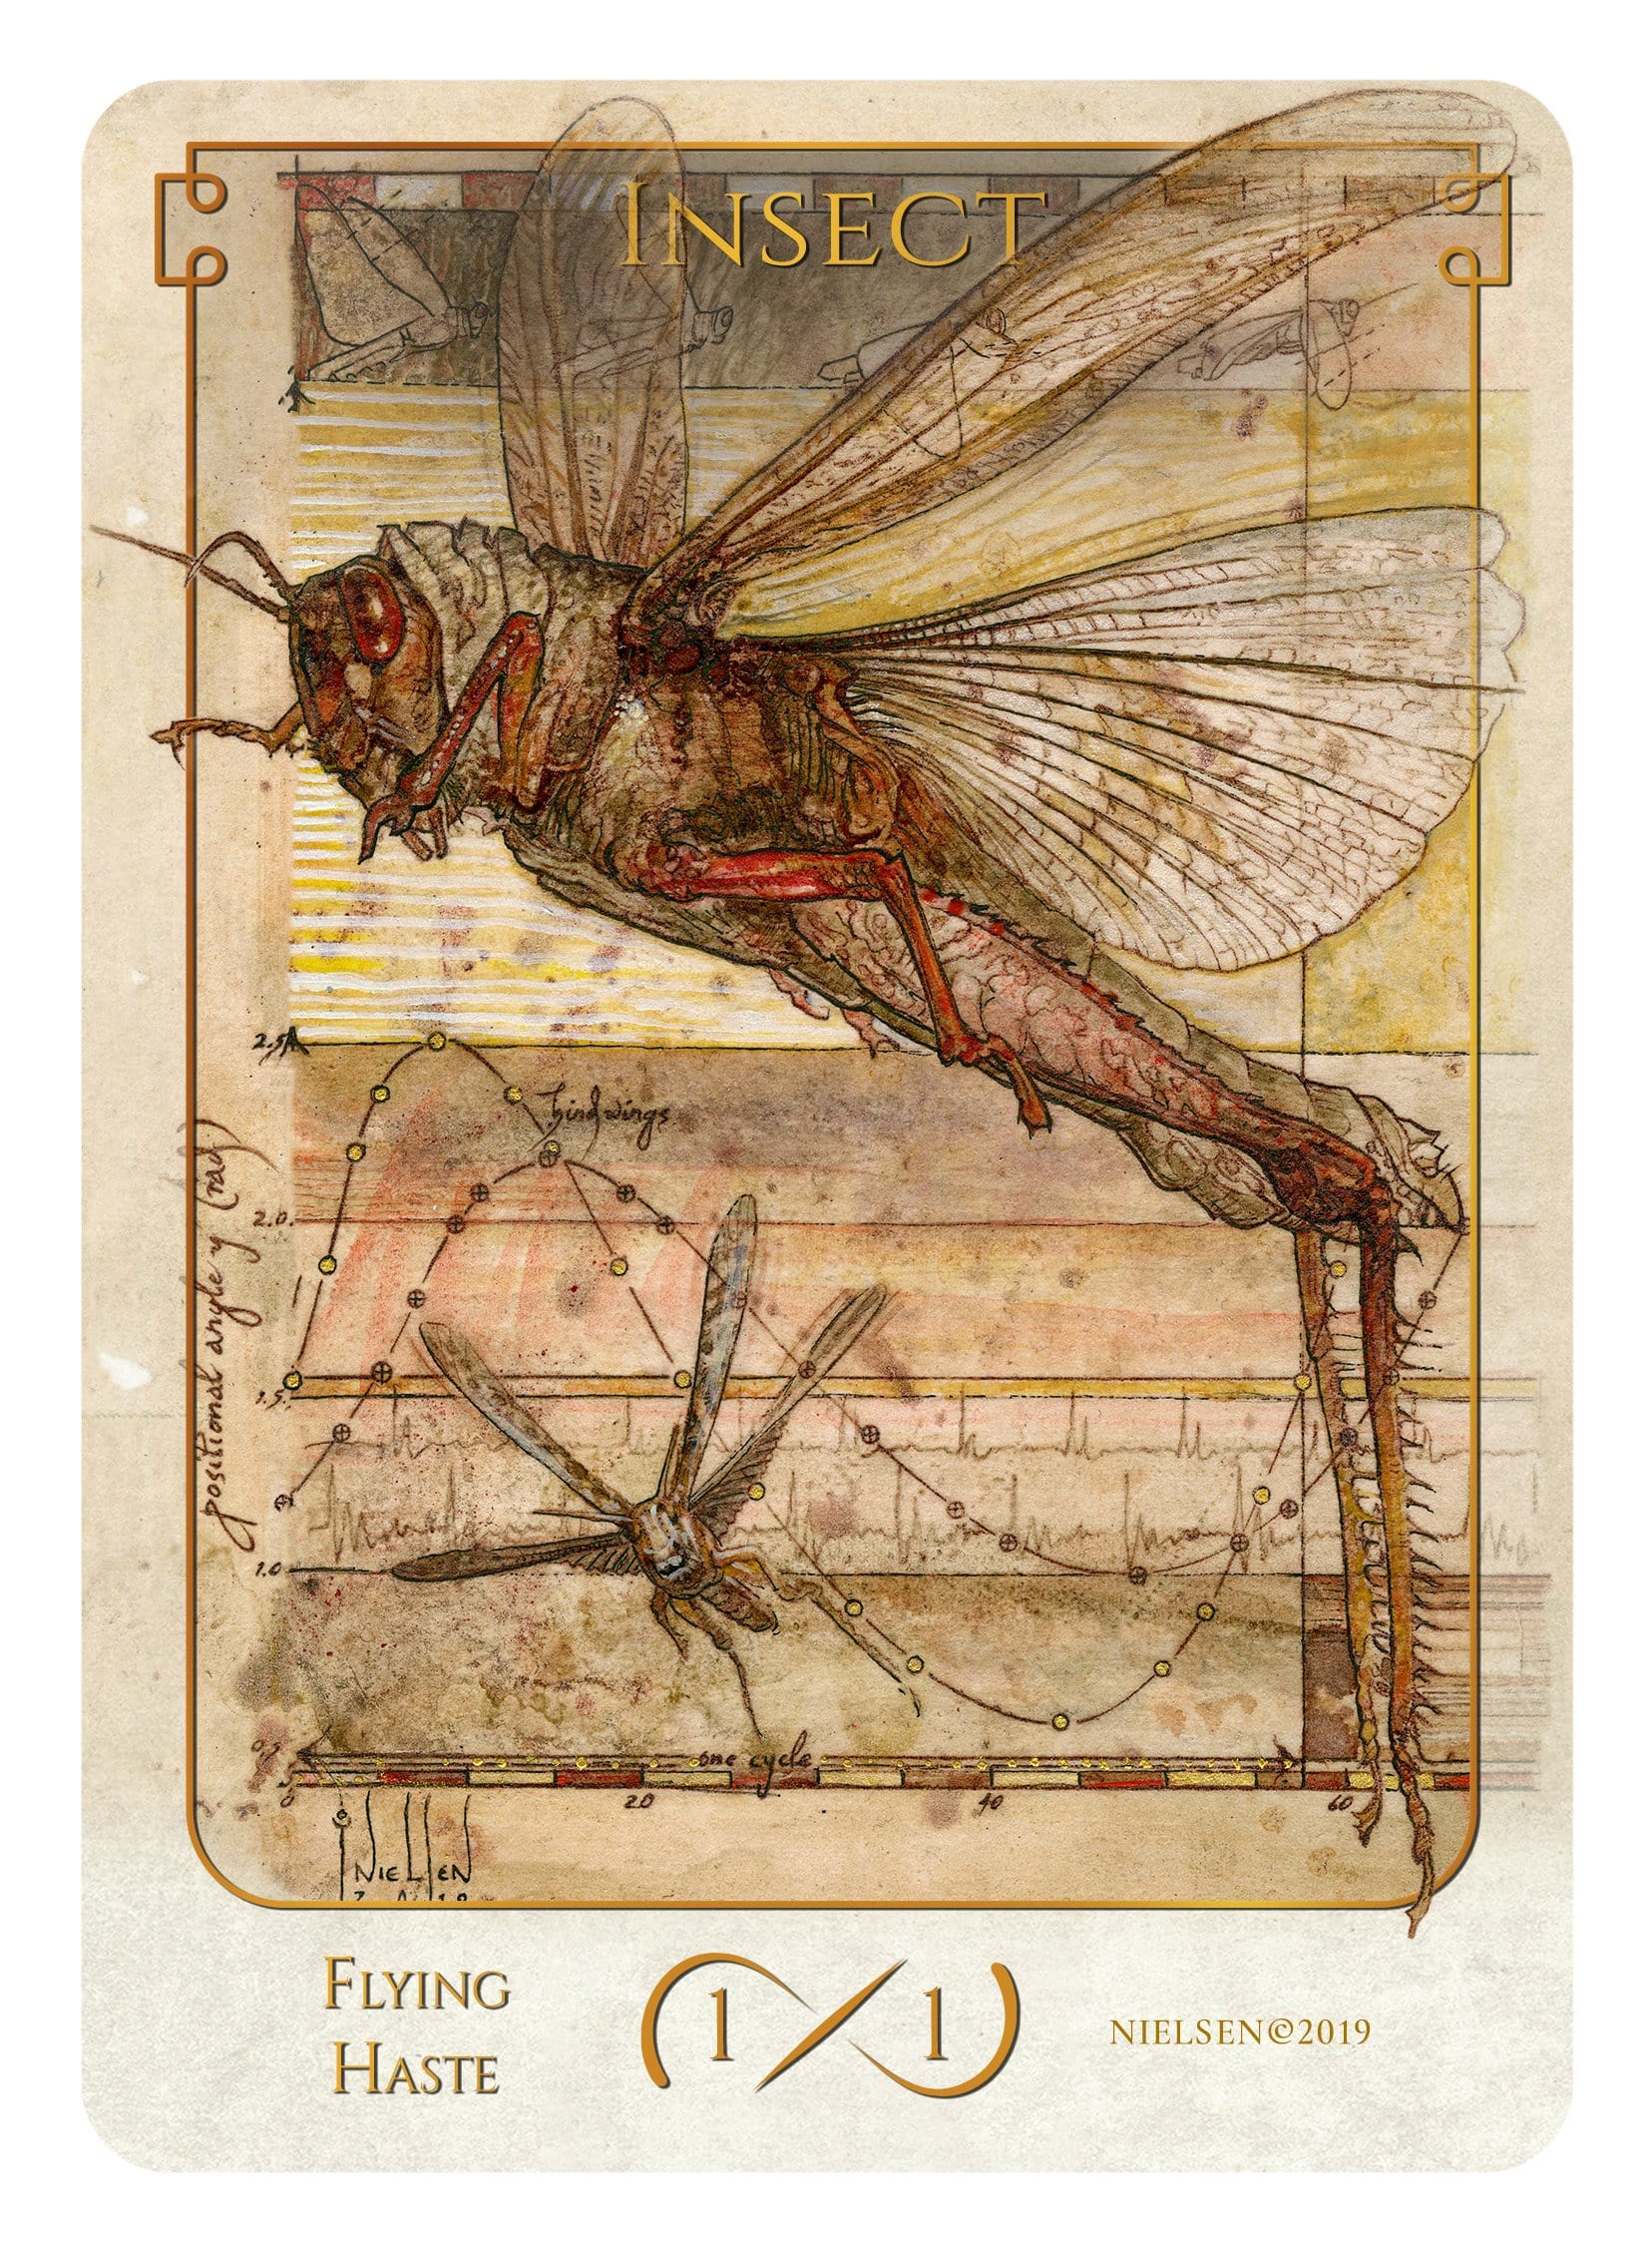 Insect Token (1/1 - Flying, Haste) by Tokens of Spirit